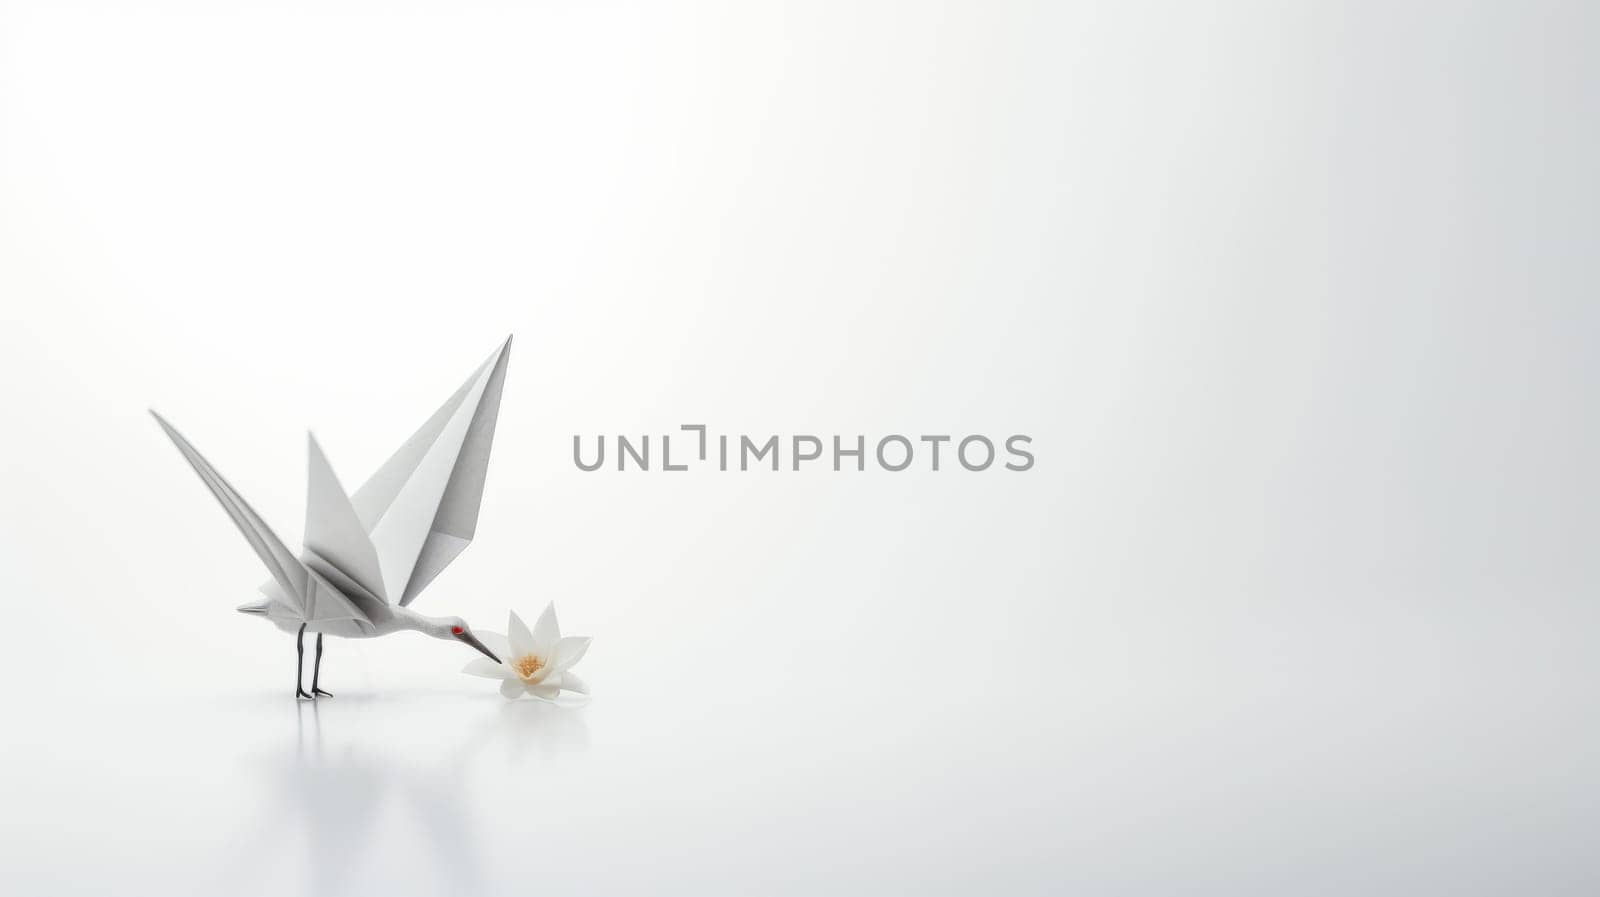 An origami bird with a flower on a white background. The bird is white and stands on two legs. The flower is yellow and in its beak. The background is white and fades to gray. A graceful and artistic image for origami, bird, or flower themes. by DogDrawHand